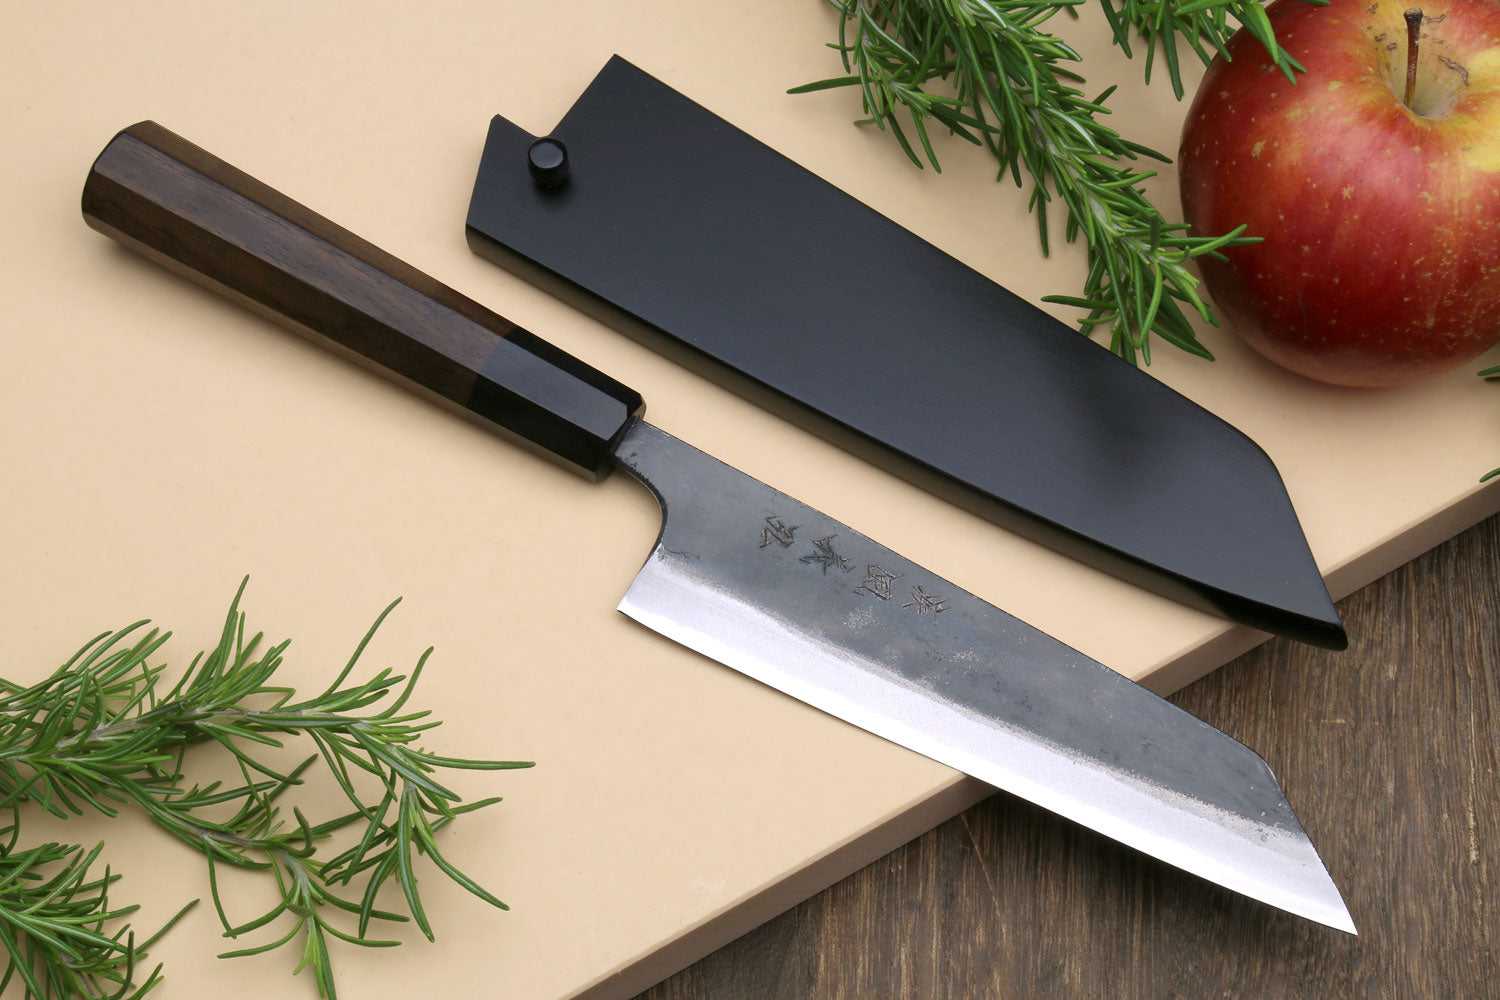 High Carbon Steel Knives